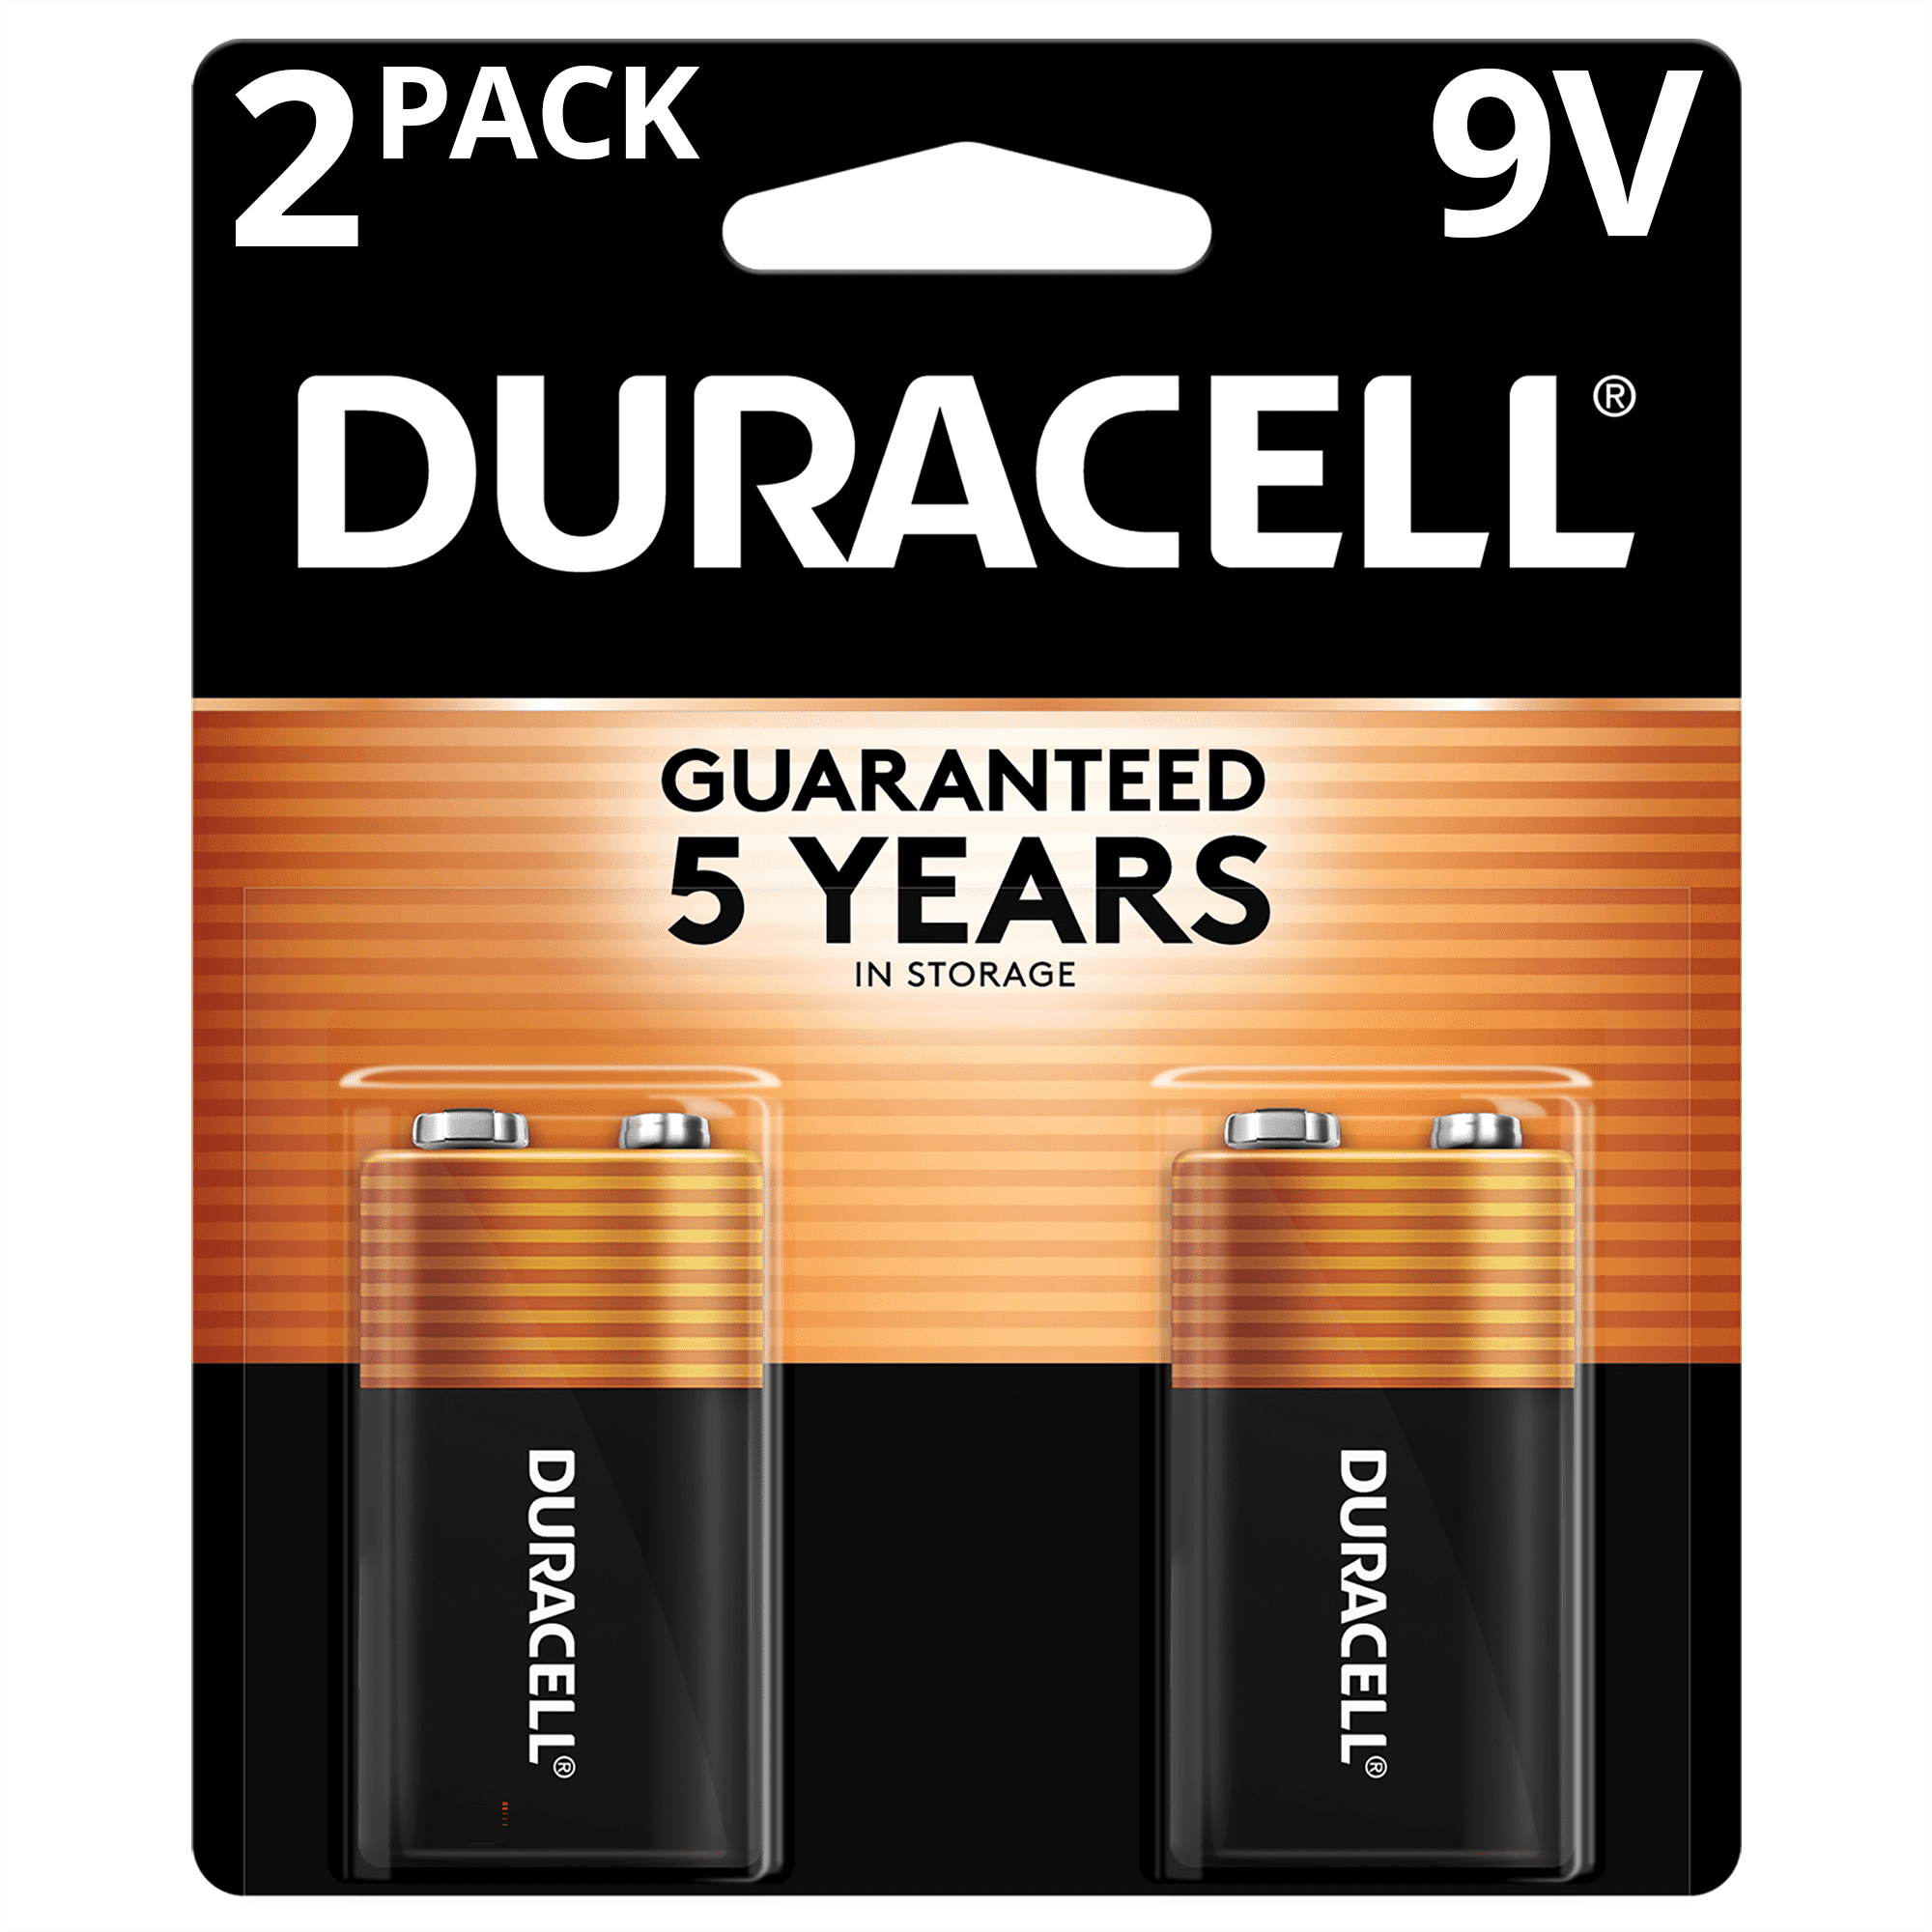 Duracell Industrial 9V PP3 MN1604 Block Professional High Performance Batteries 